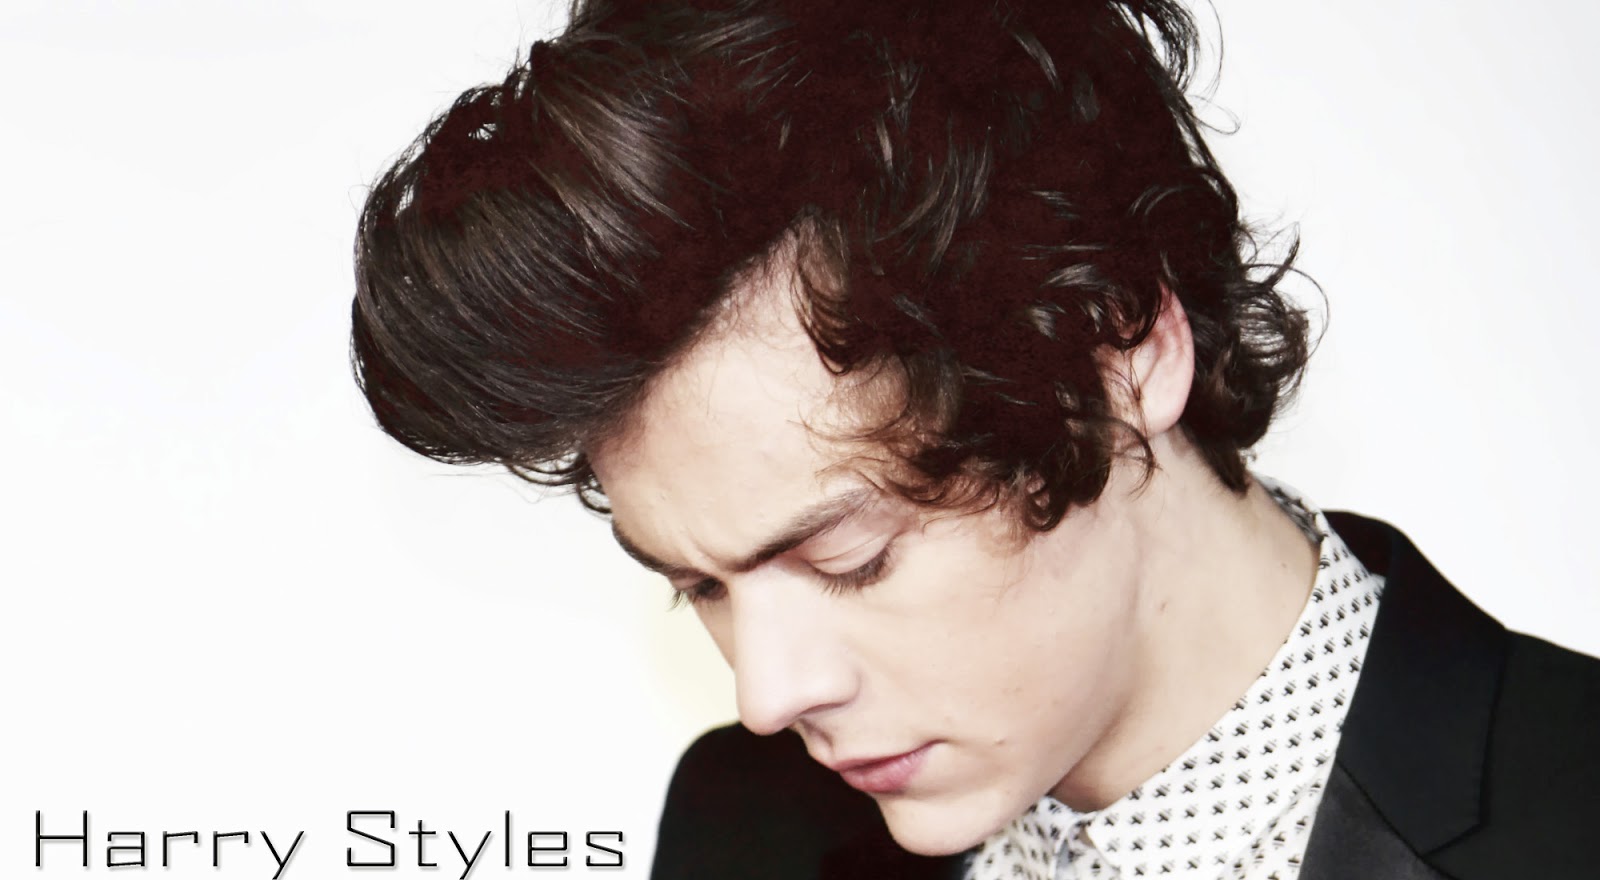 Harry Styles Wallpapers - Wallpaper Cave